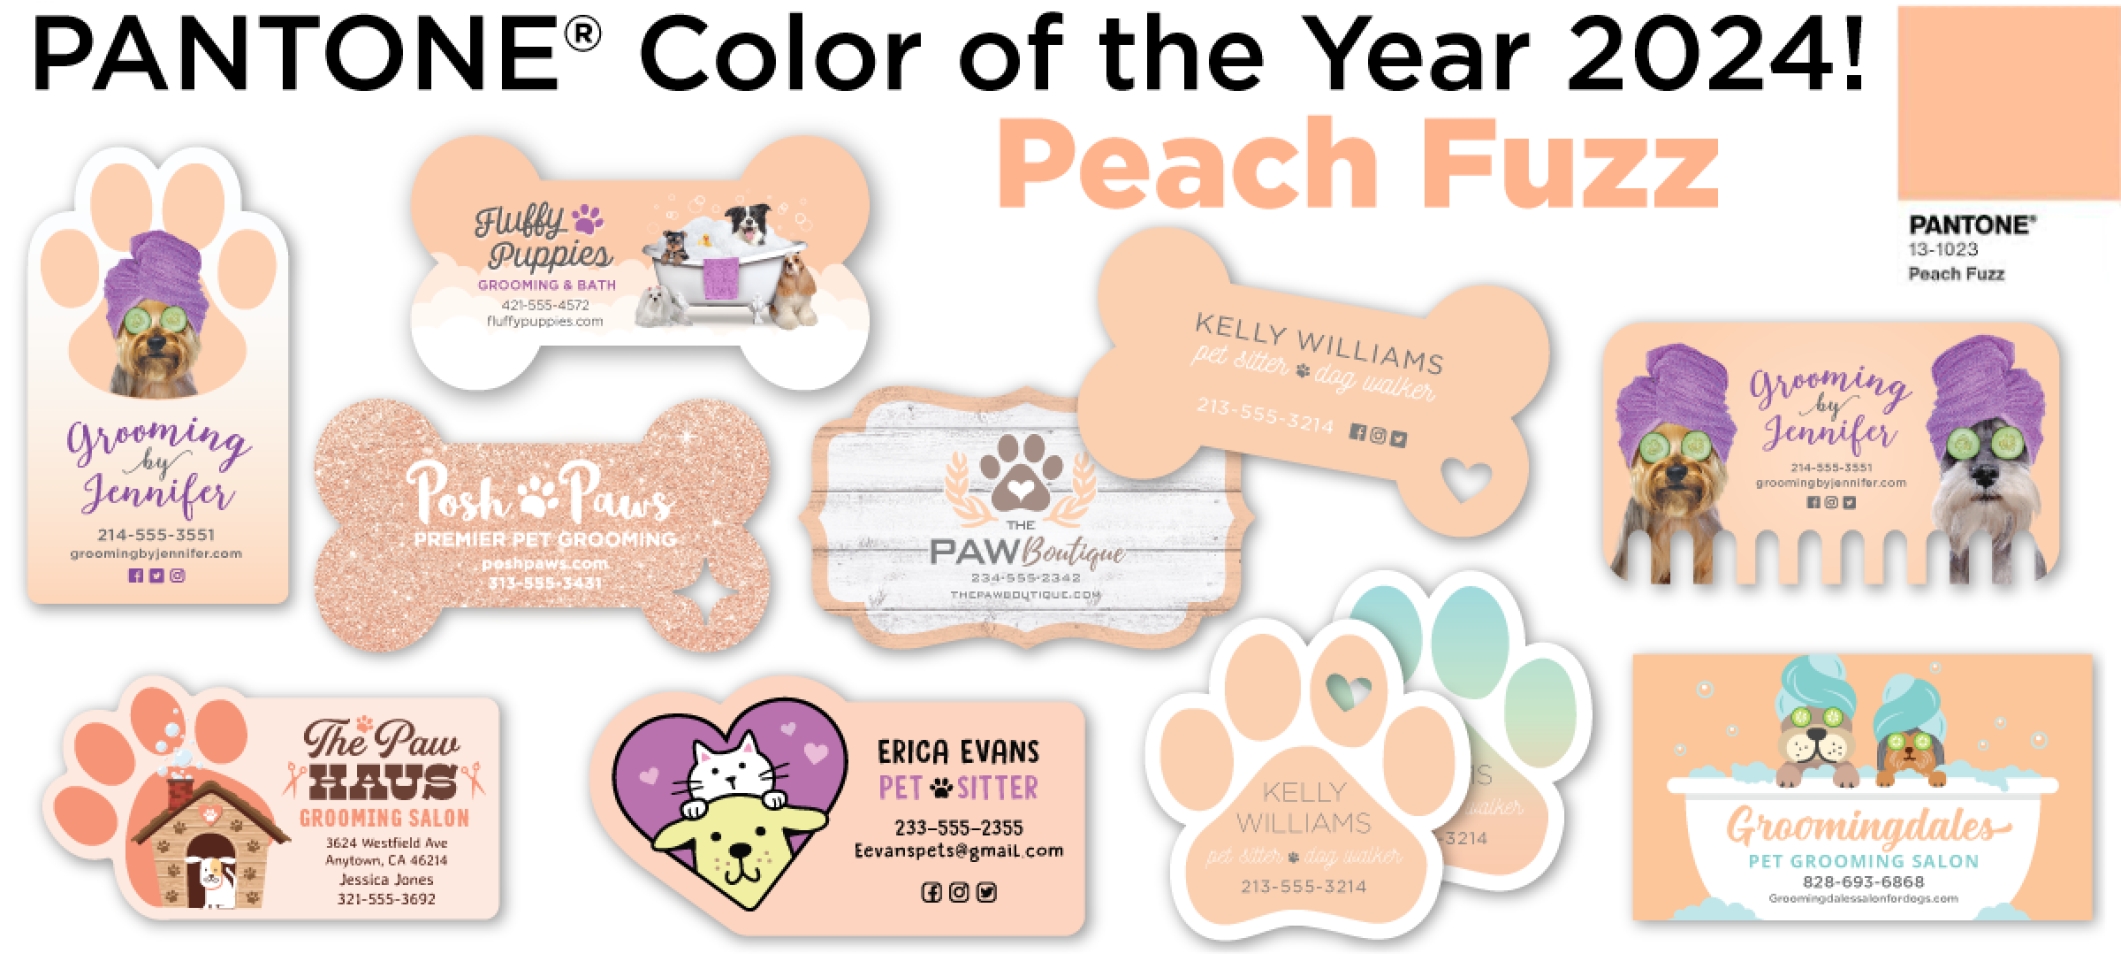 Pantone color of the year: Peach